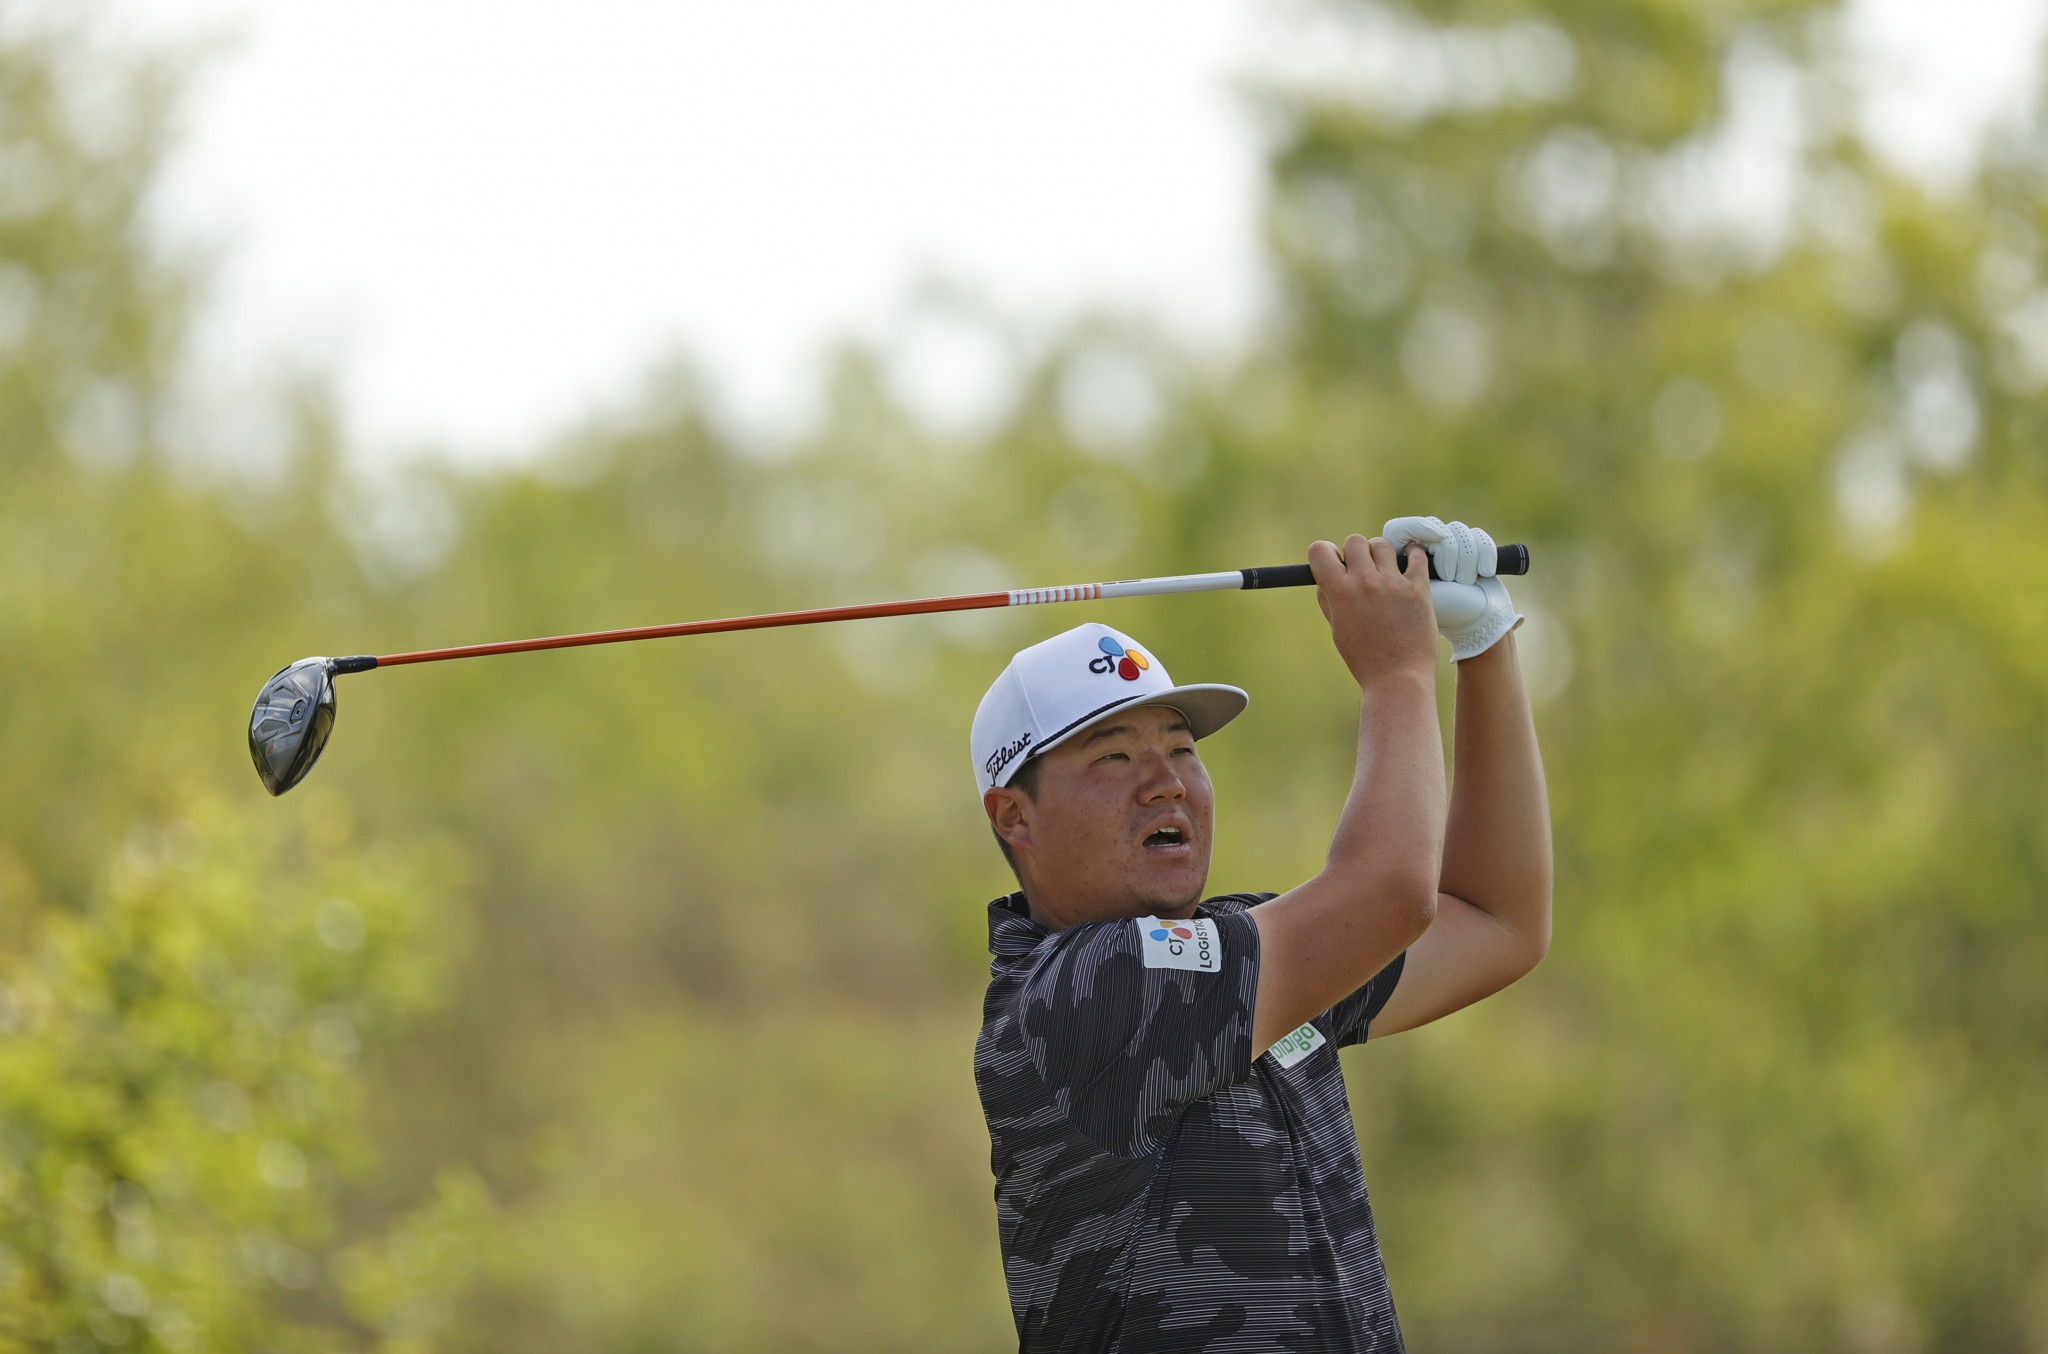 PGA Tour winners Im and Kim to compete at Hangzhou 2022 Asian Games